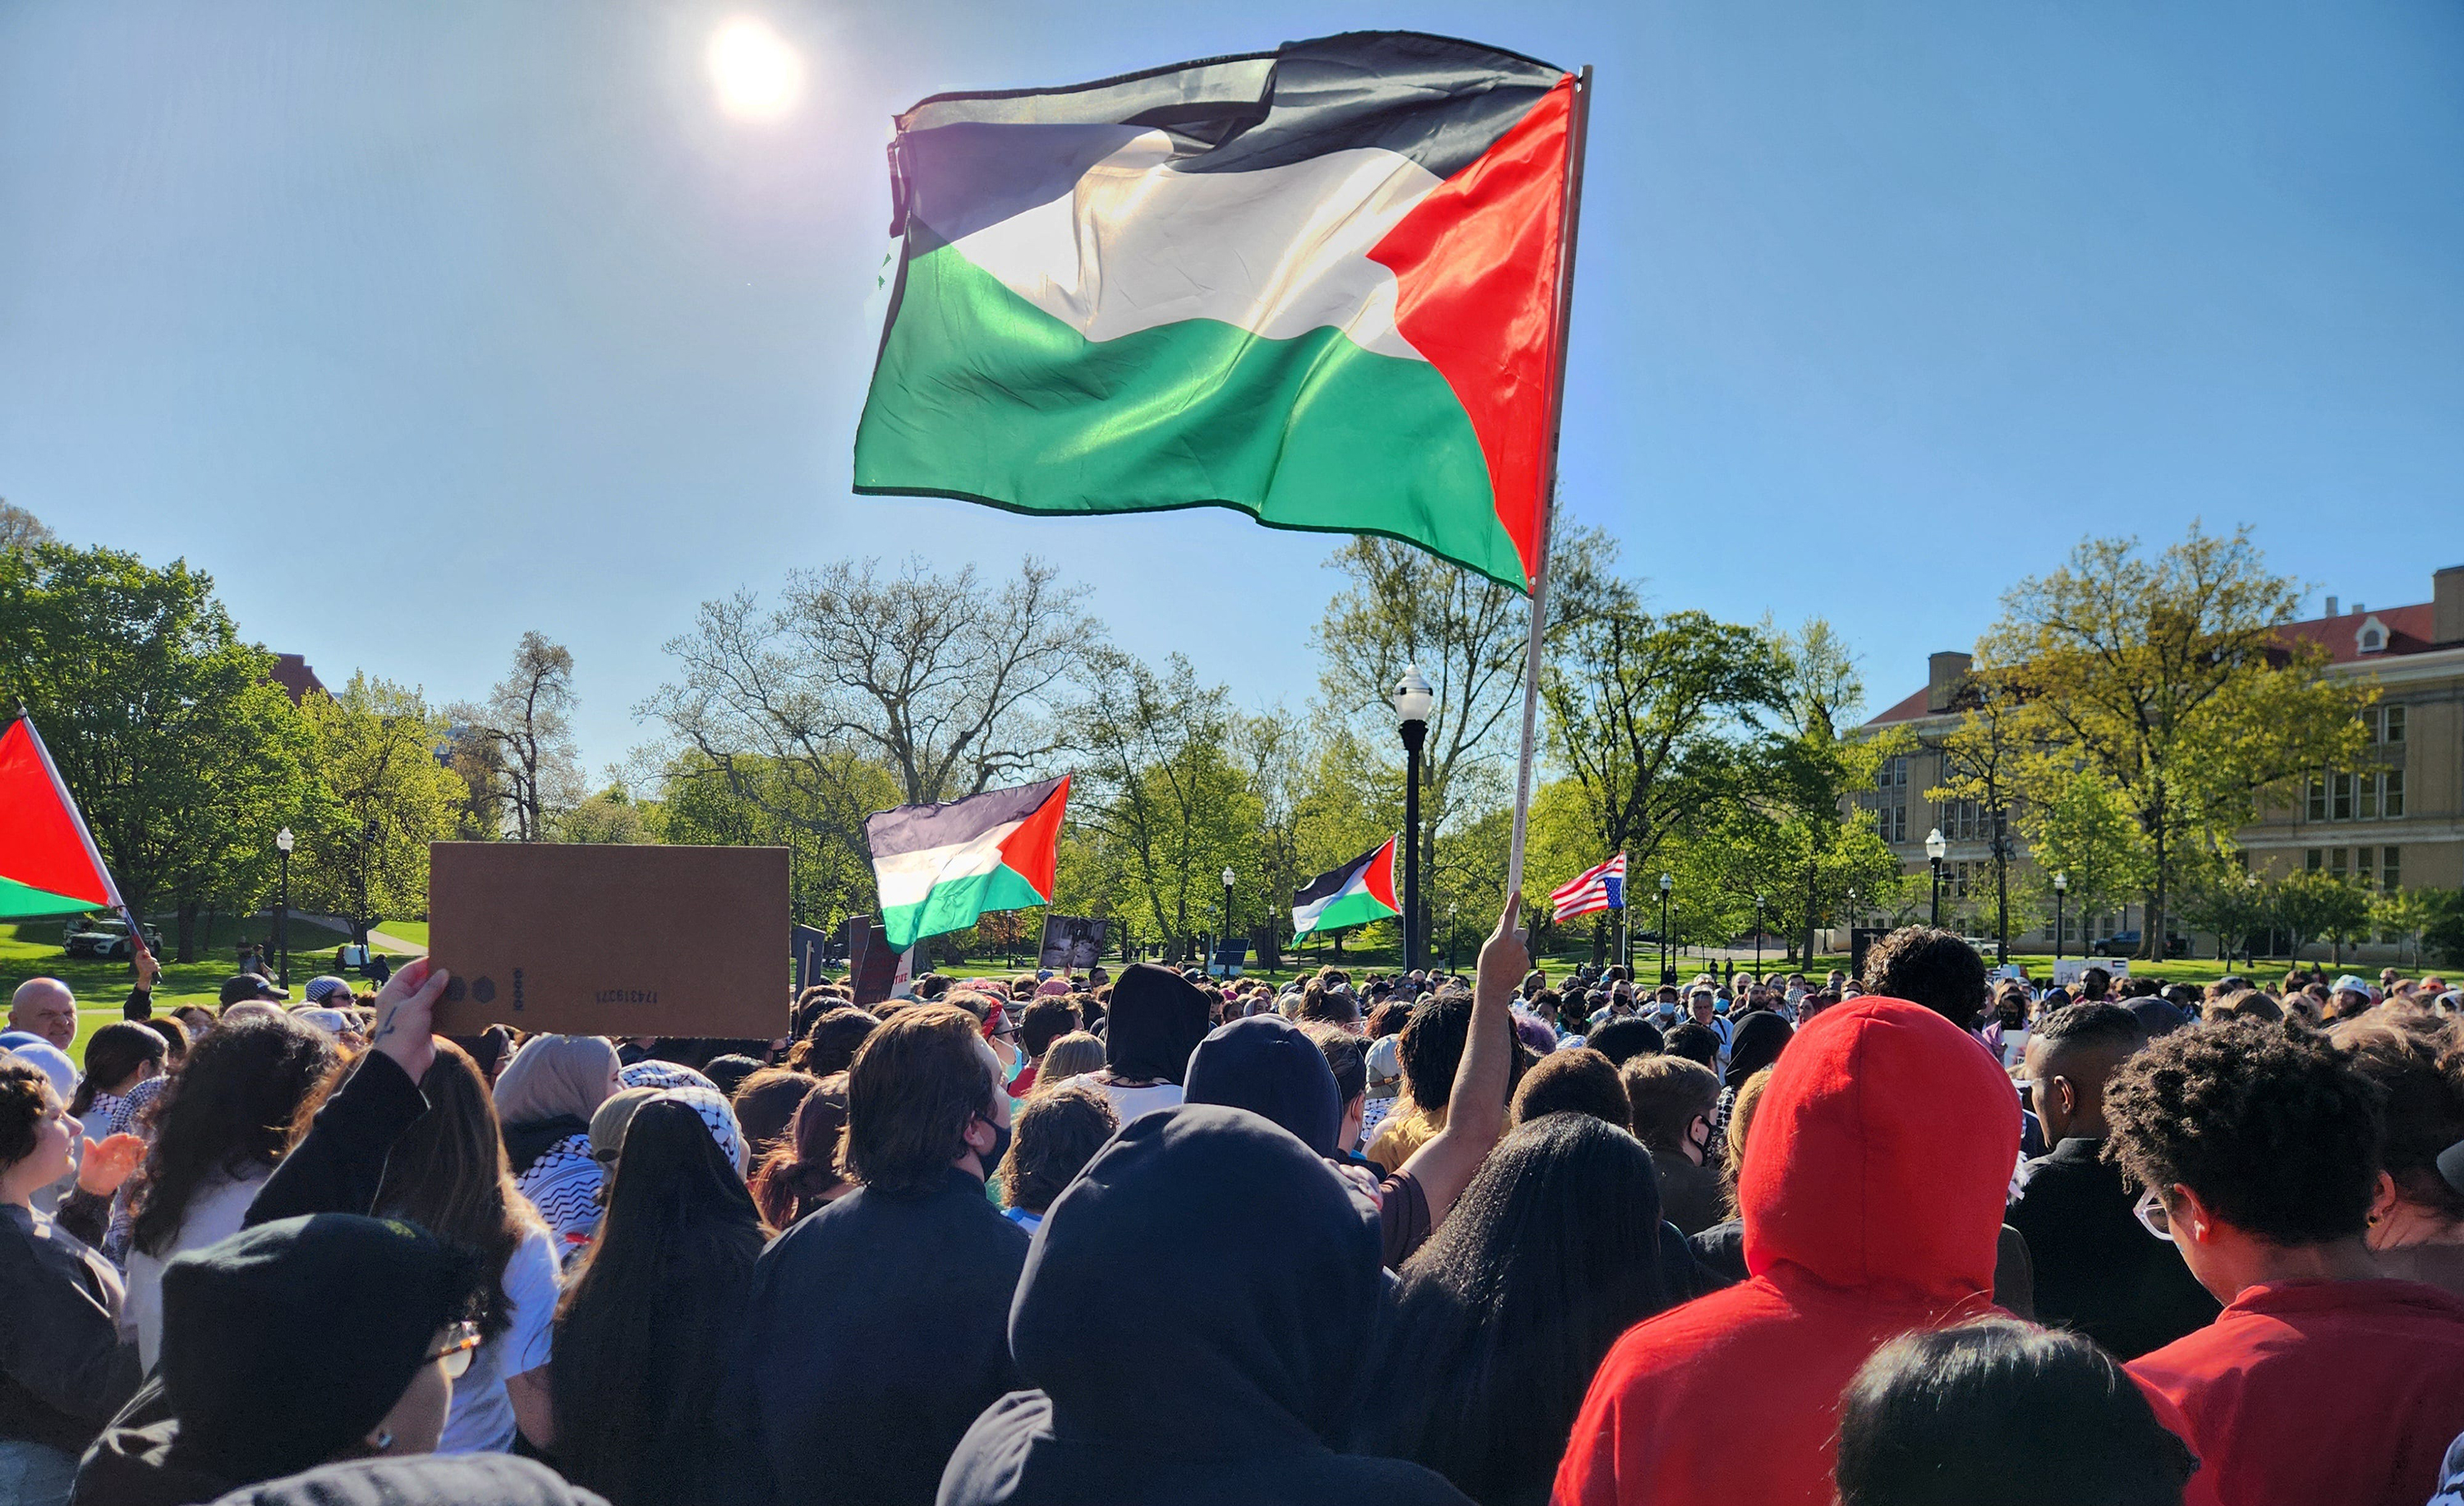 Protestors wave Palestinian flags and call for Ohio State University to divest investment in businesses linked to Israel at a demonstration outside the Ohio Union on April 25.